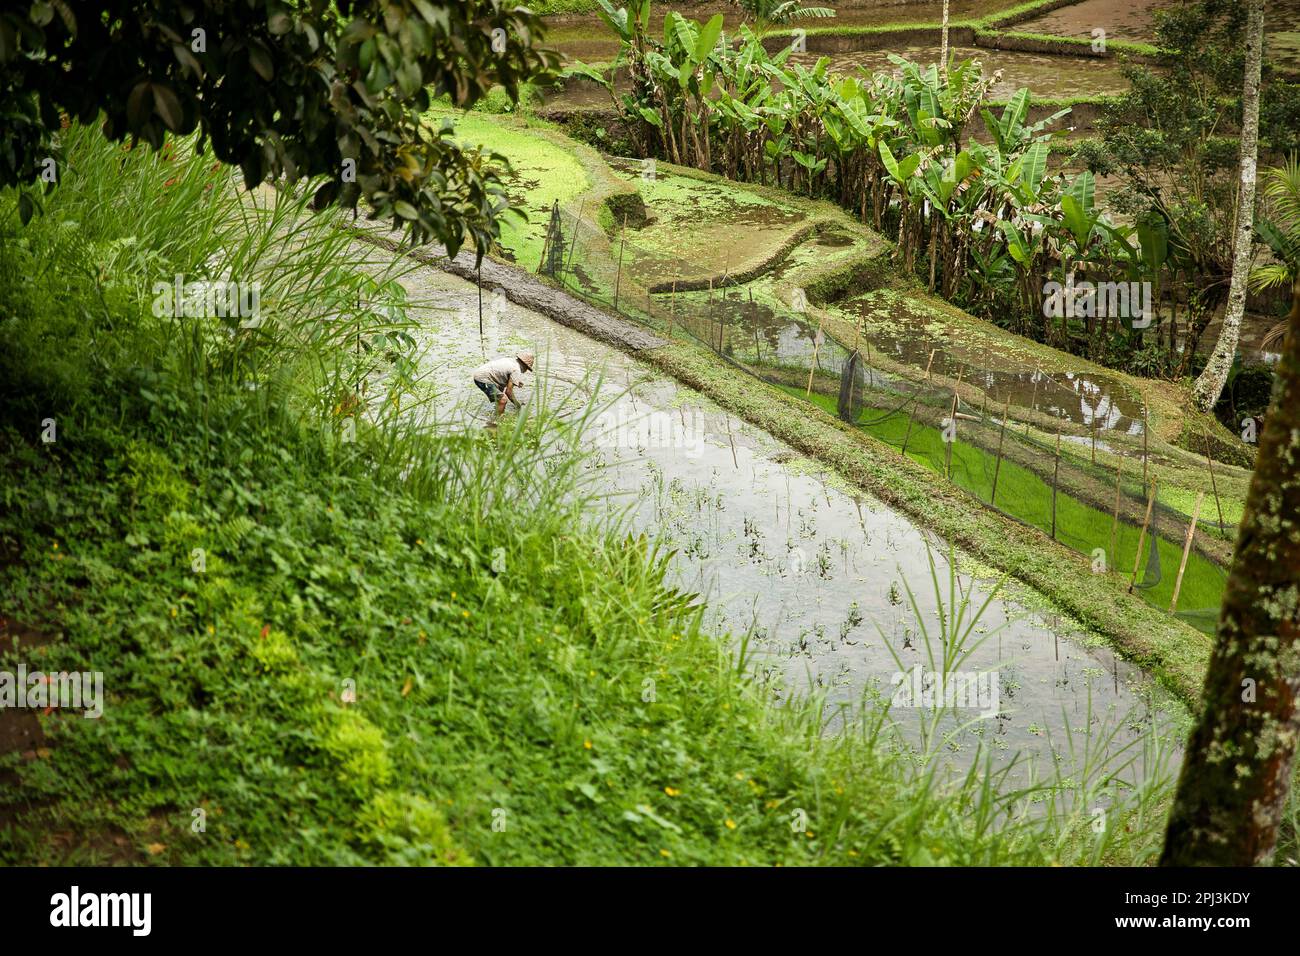 The tropical Tegalalang rice terraces of Ubud on Bali, Indonesia, surrounded by palm trees and a rice farmer working in the rice pond. Stock Photo